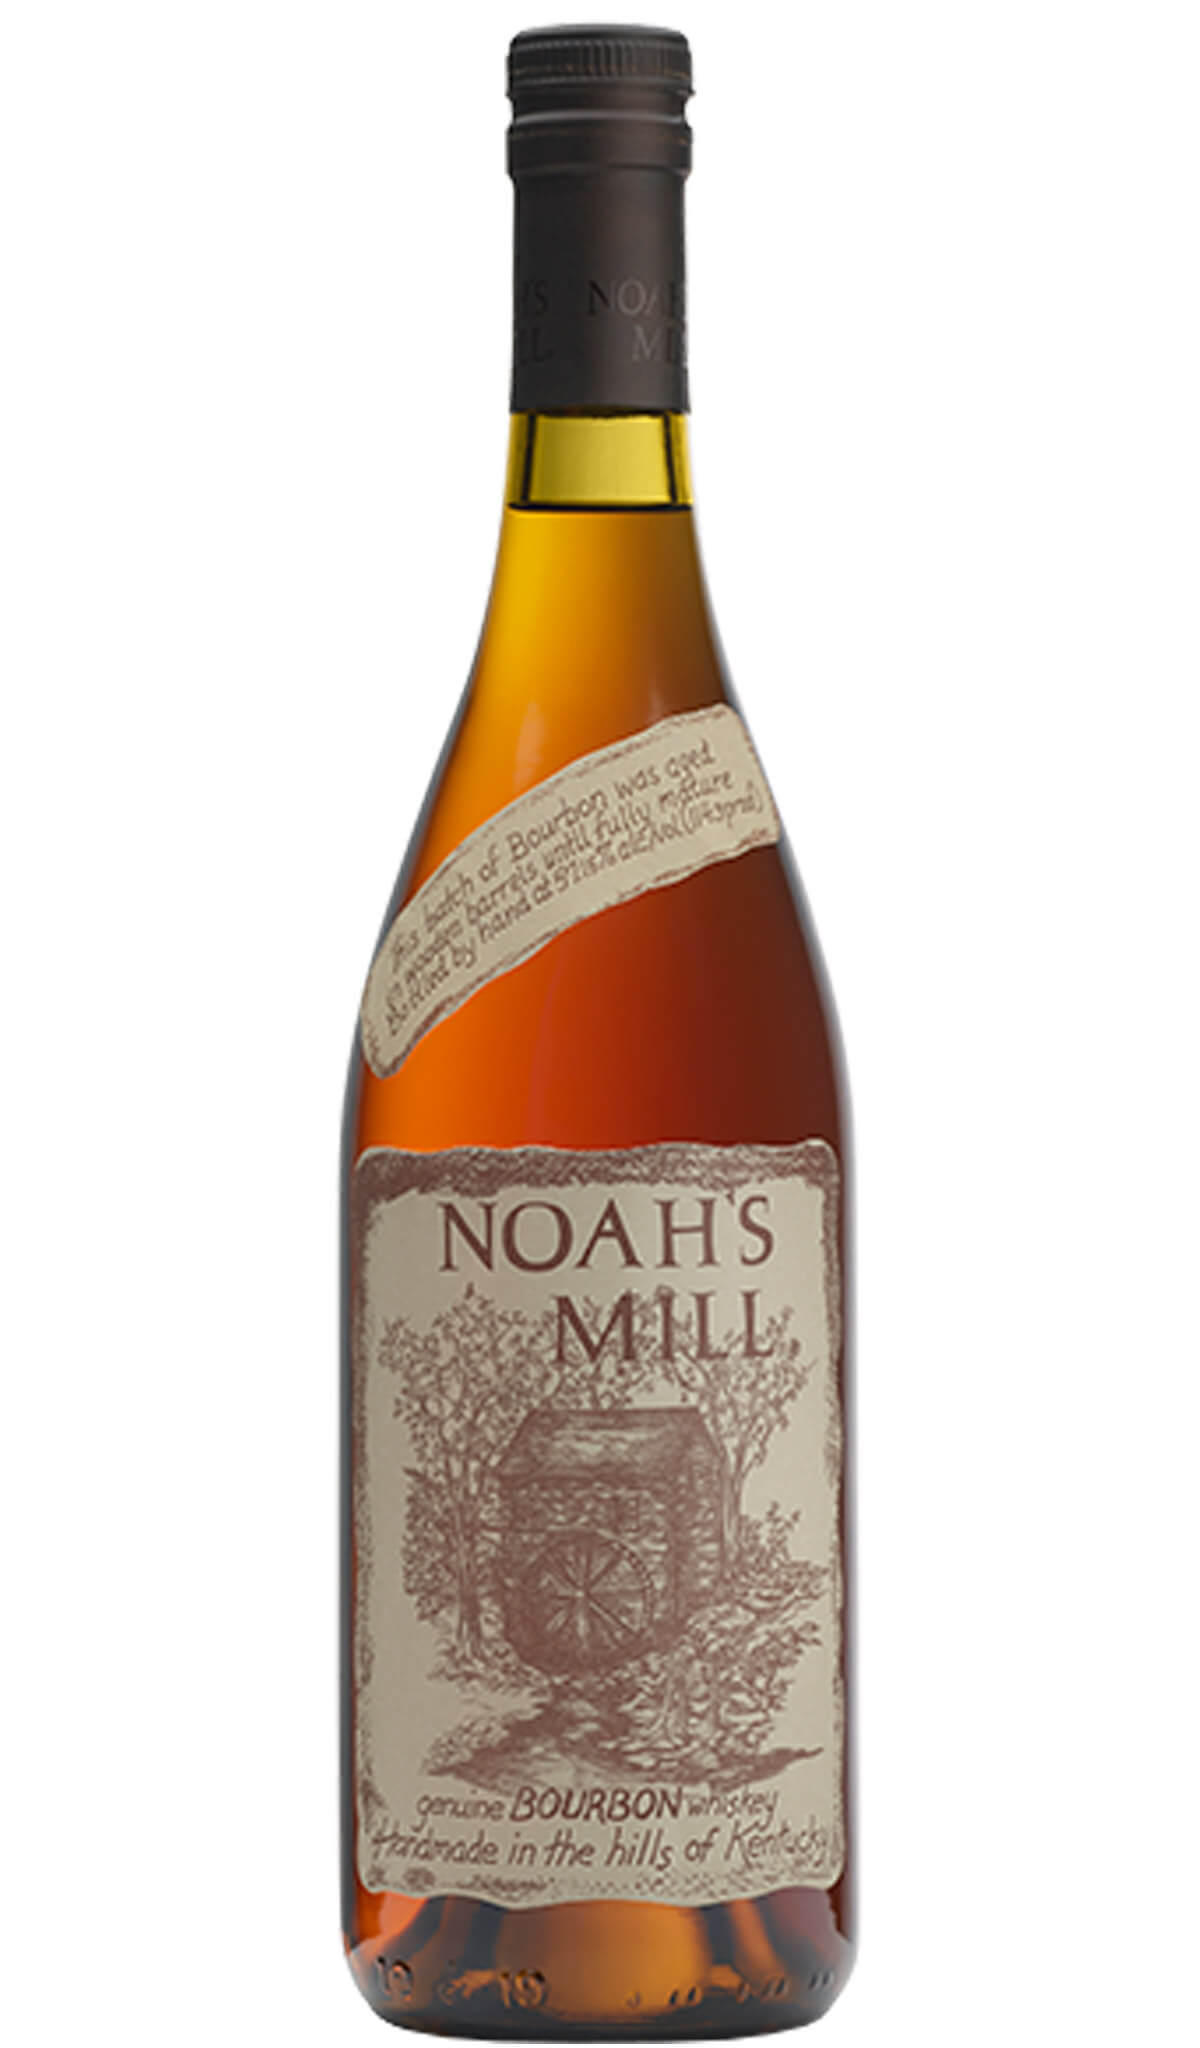 Find out more, explore the range and buy Willett Noah's Mill Bourbon 750mL available online at Wine Sellers Direct - Australia's independent liquor specialists.